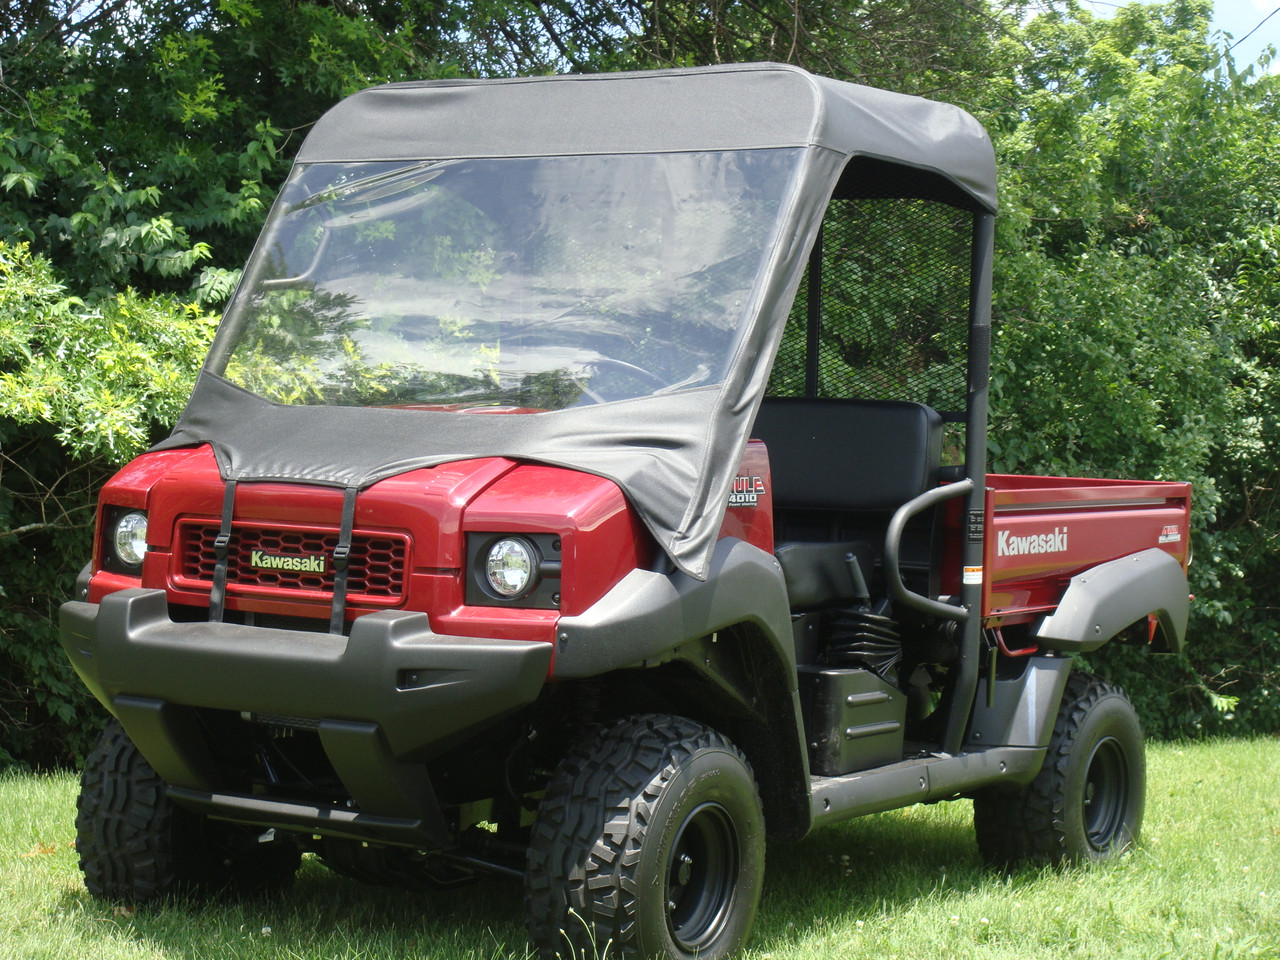 3 Star side x side Kawasaki Mule 4000/4010 vinyl windshield and top front angle view